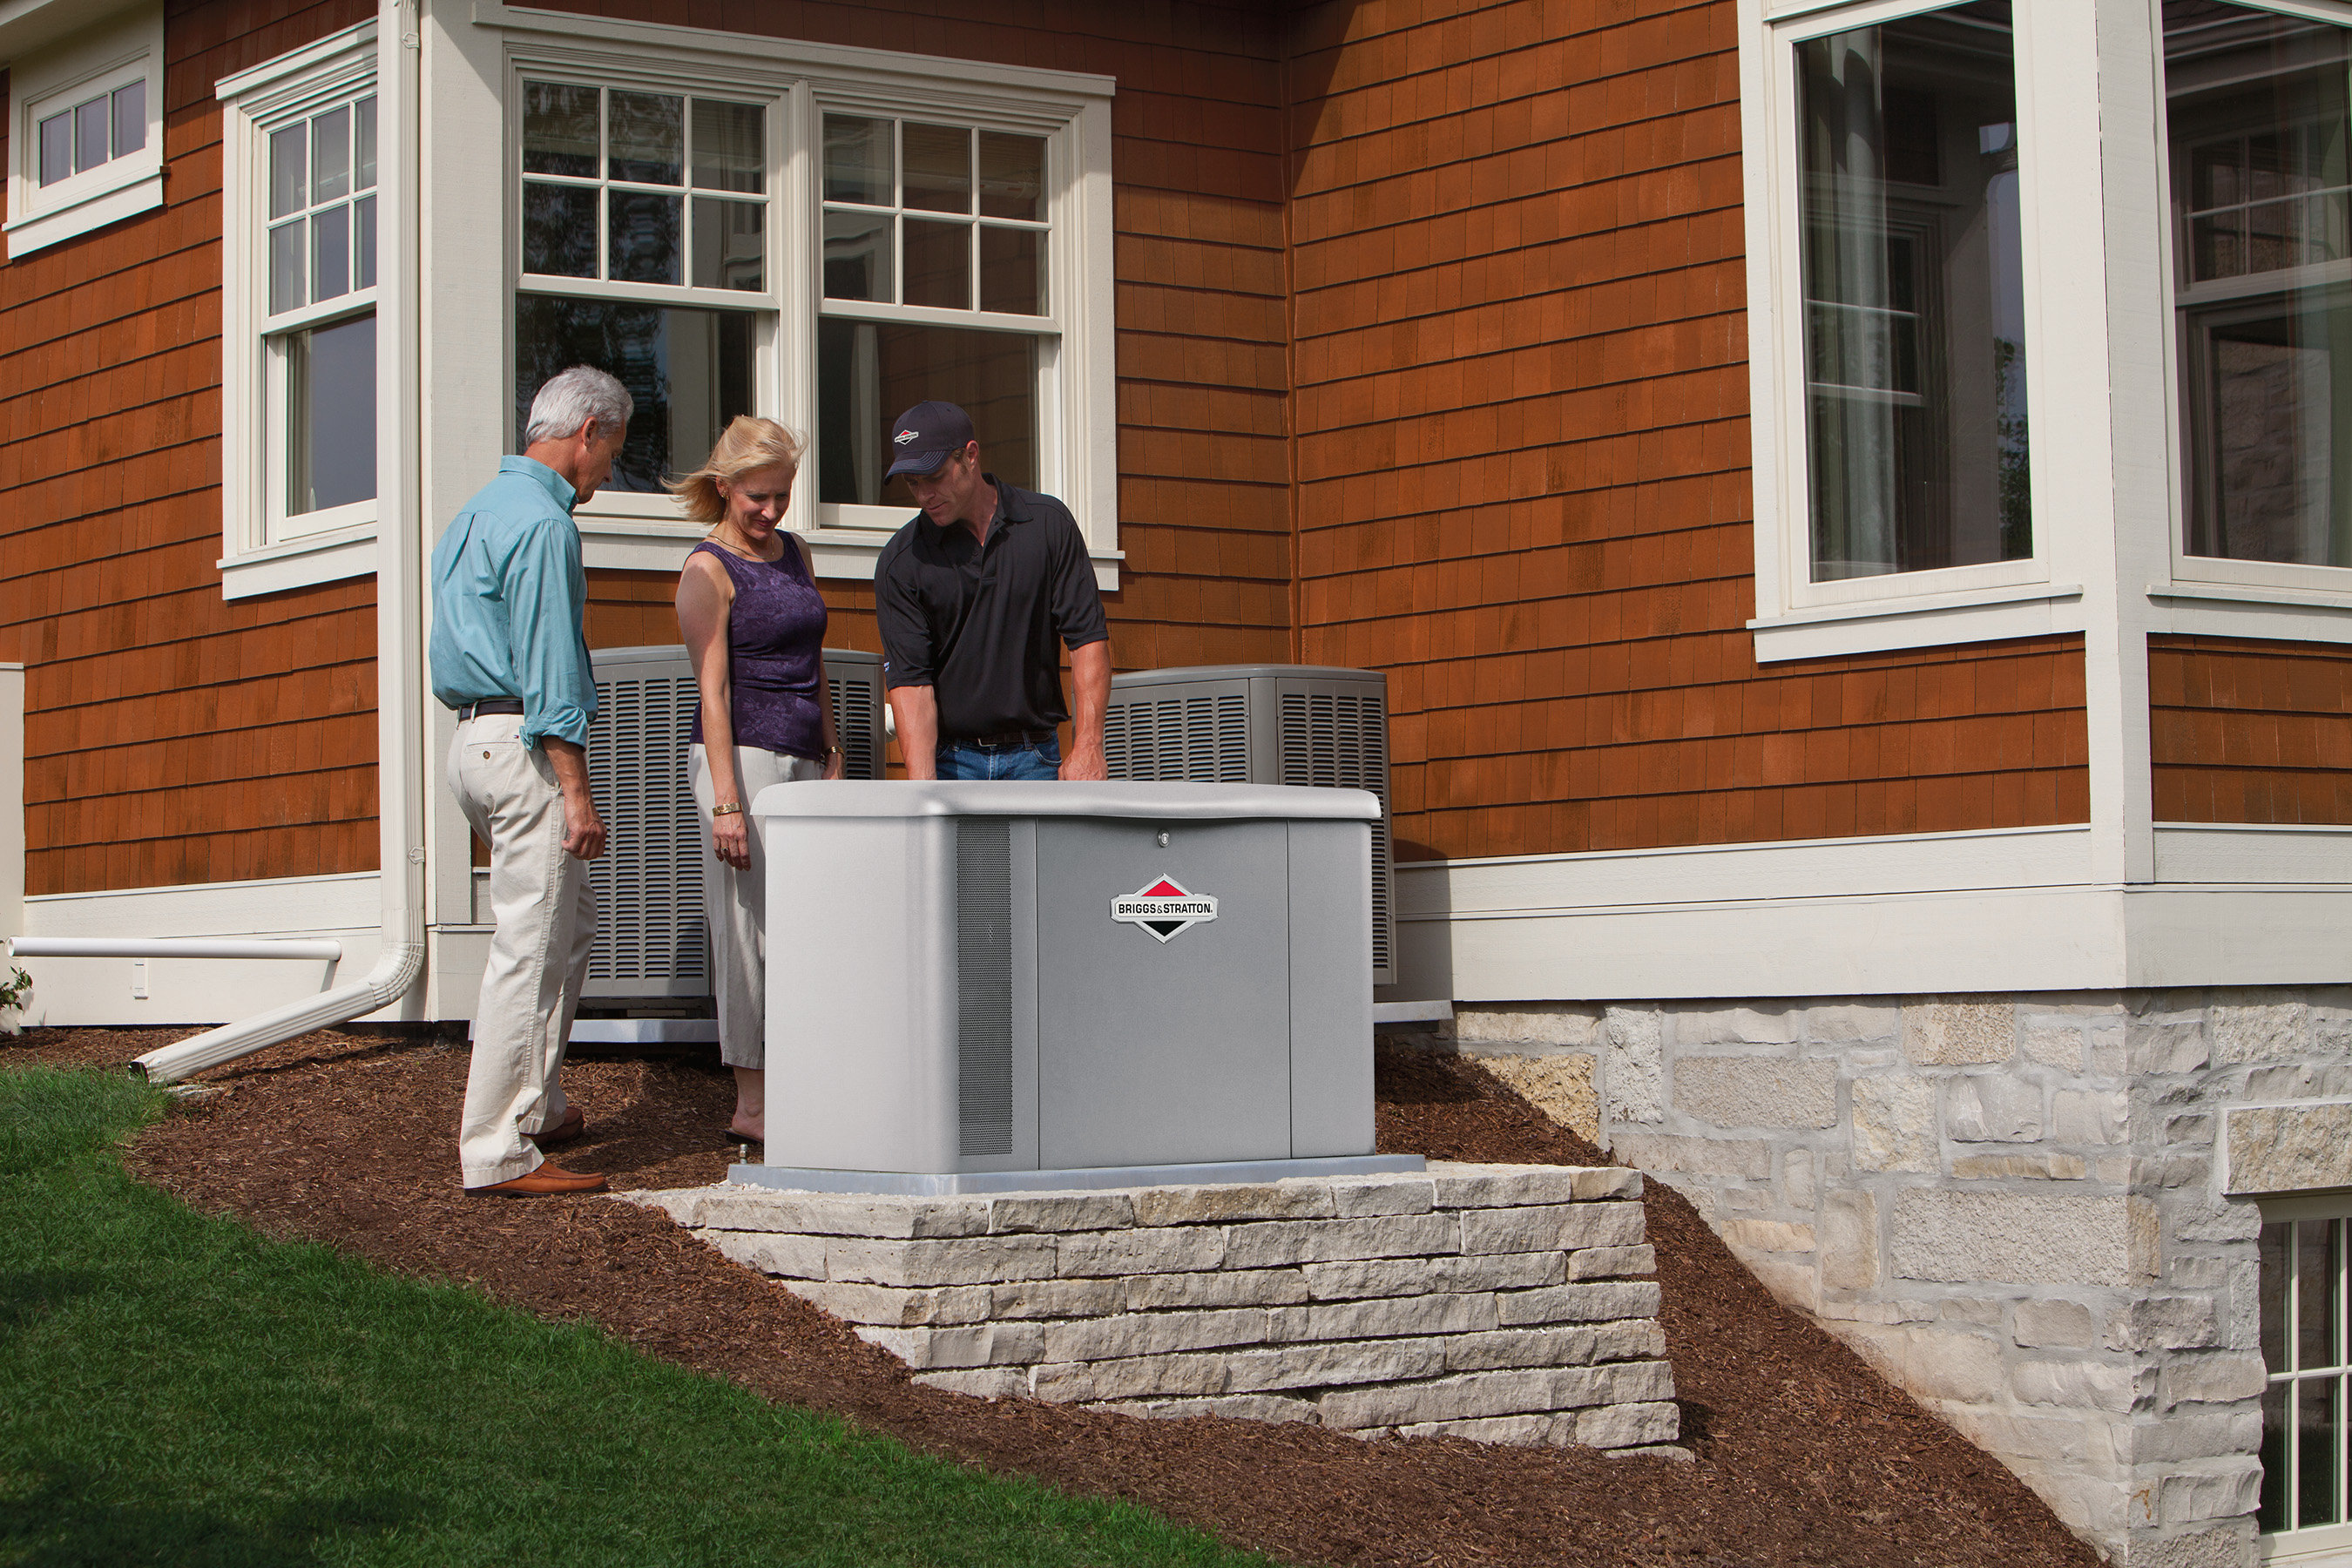 Plan ahead by talking with an authorized Briggs & Stratton standby generator dealer about standby power for your home.